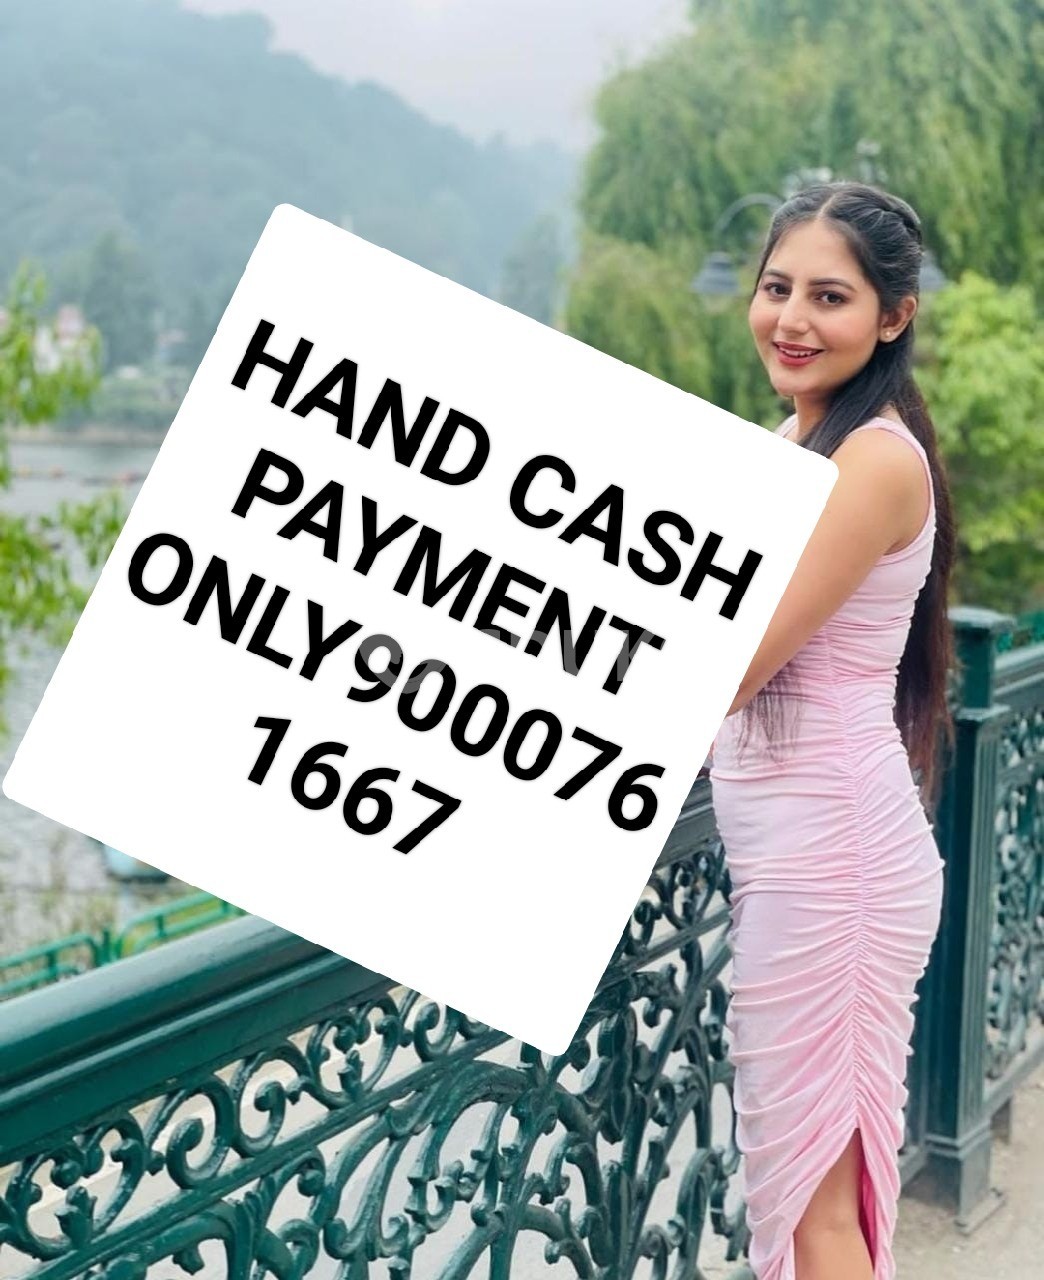 9OOO761667NO ADVANCE ONLY CASH PAYMENT HAND CASH PAYMENT SERVICE